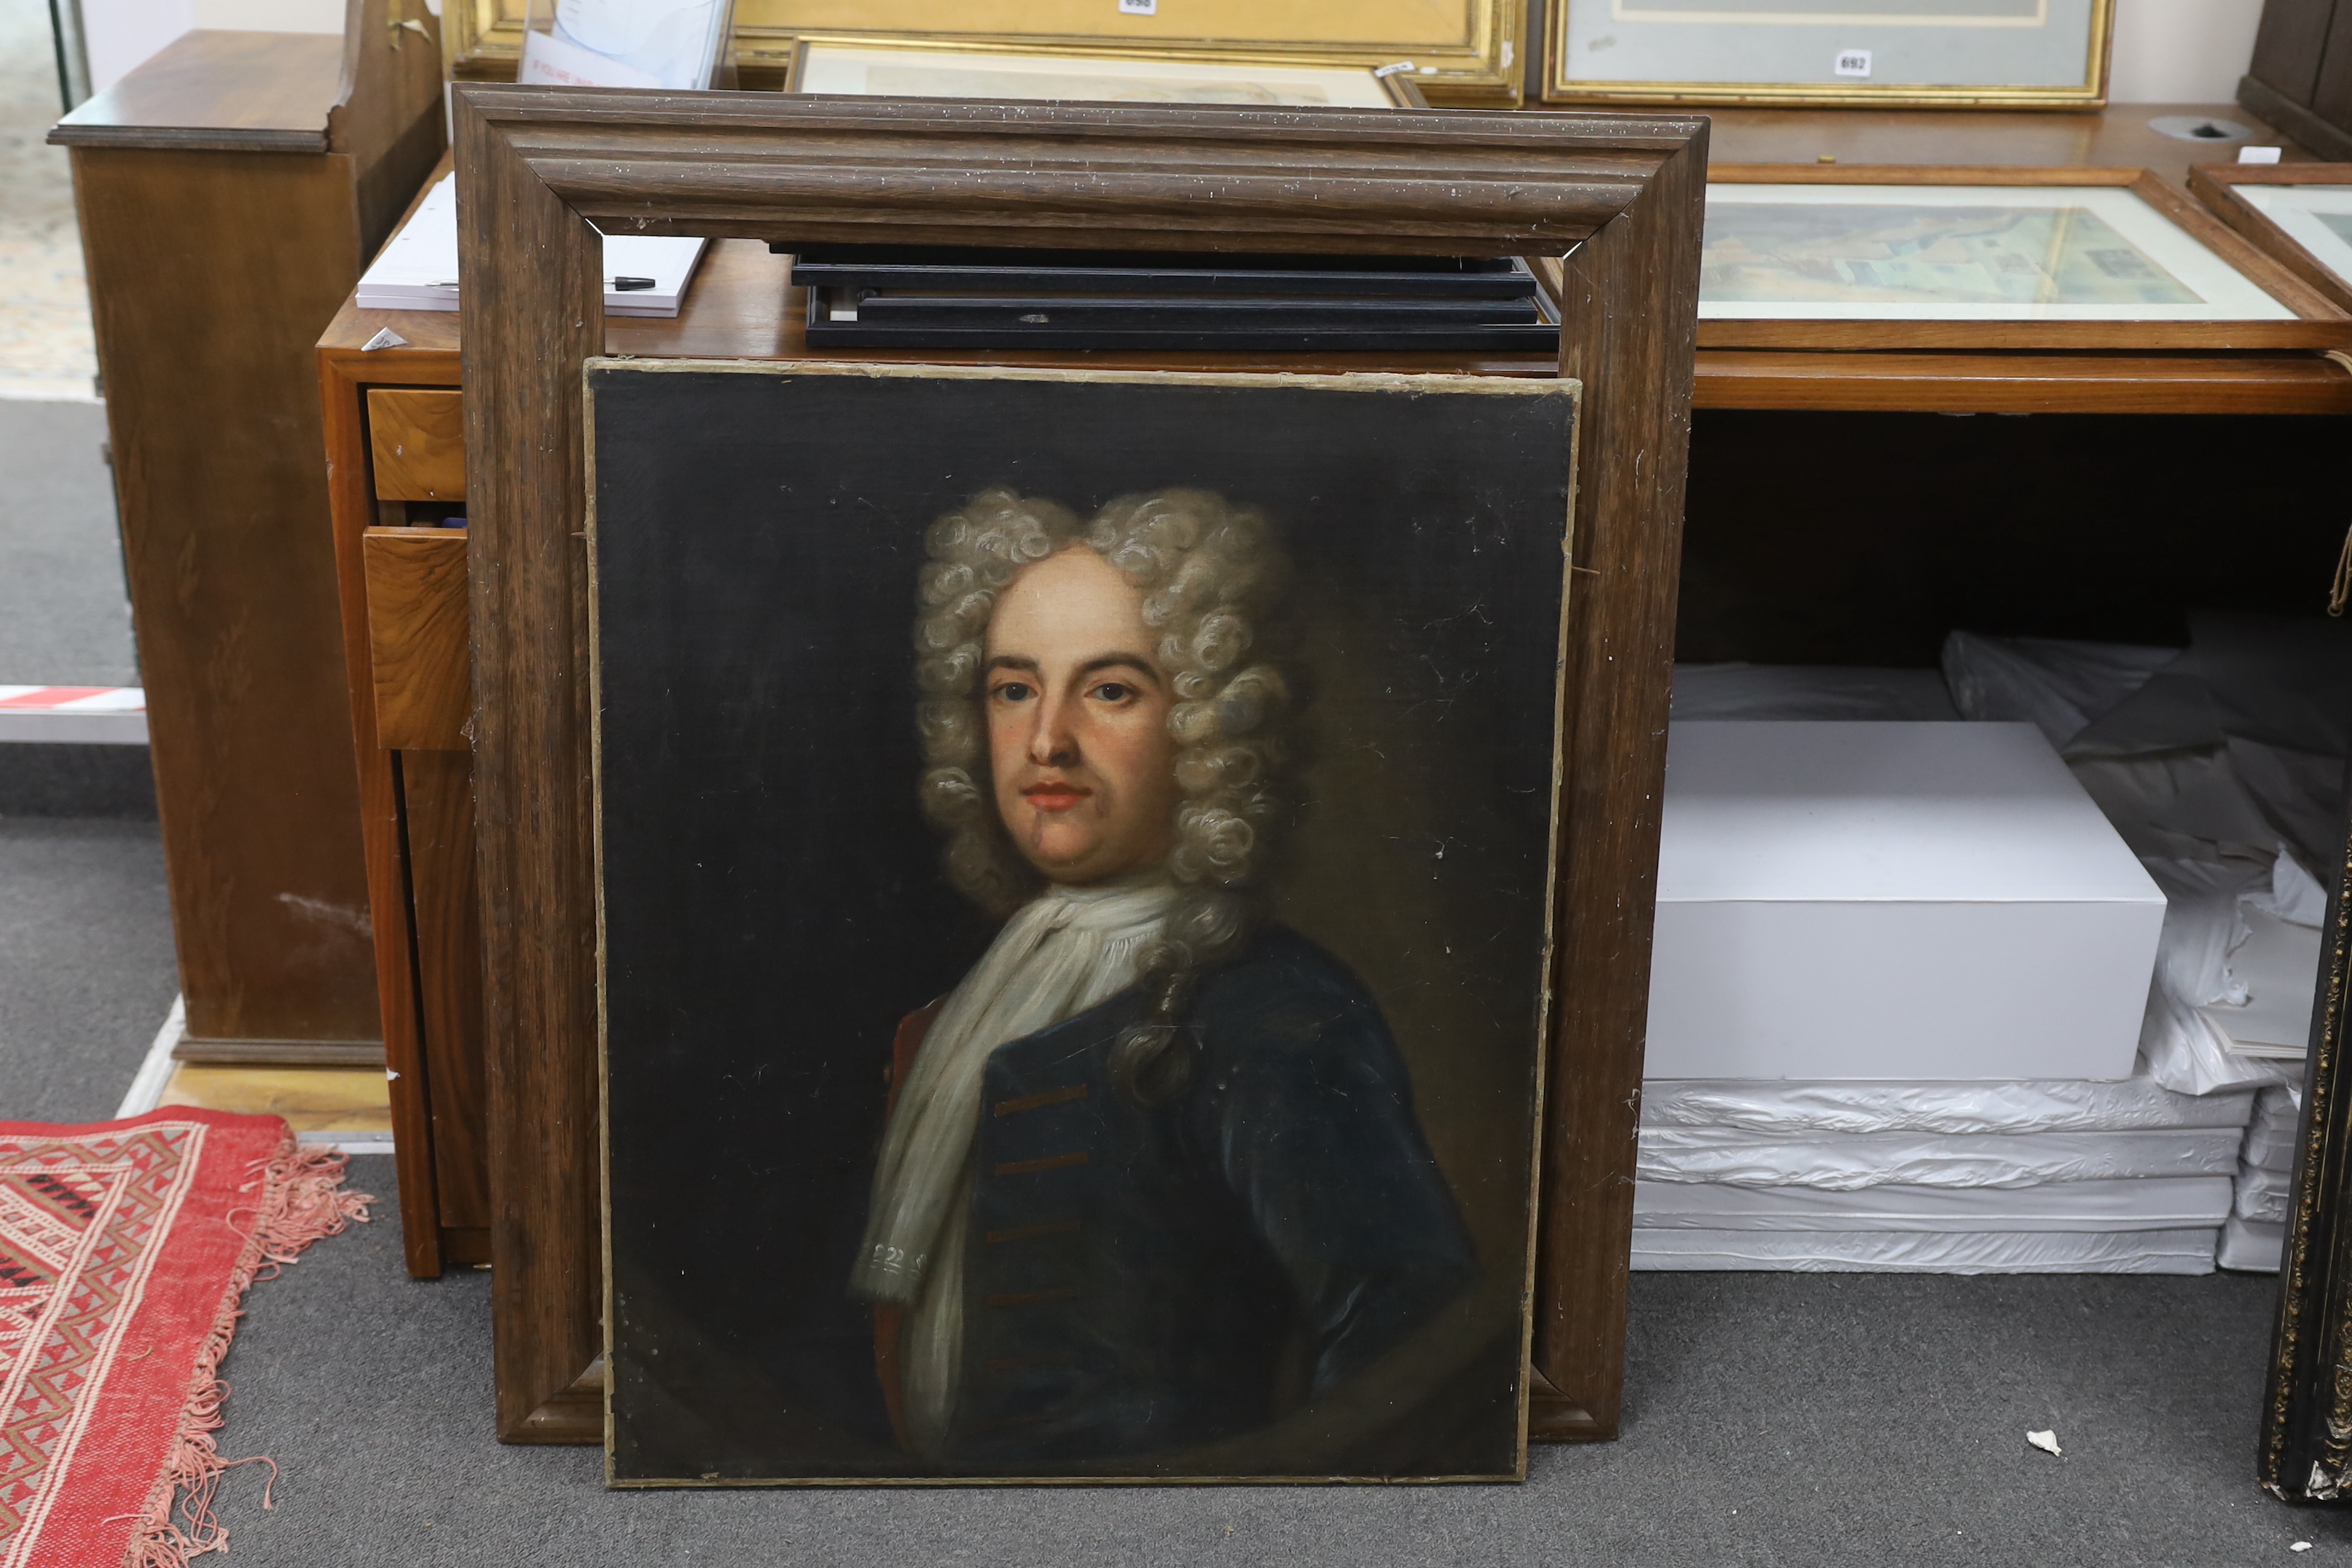 Early 18th century, English School, oil on canvas, Portrait of a gentleman, possibly Charles Talbot, - Image 2 of 2